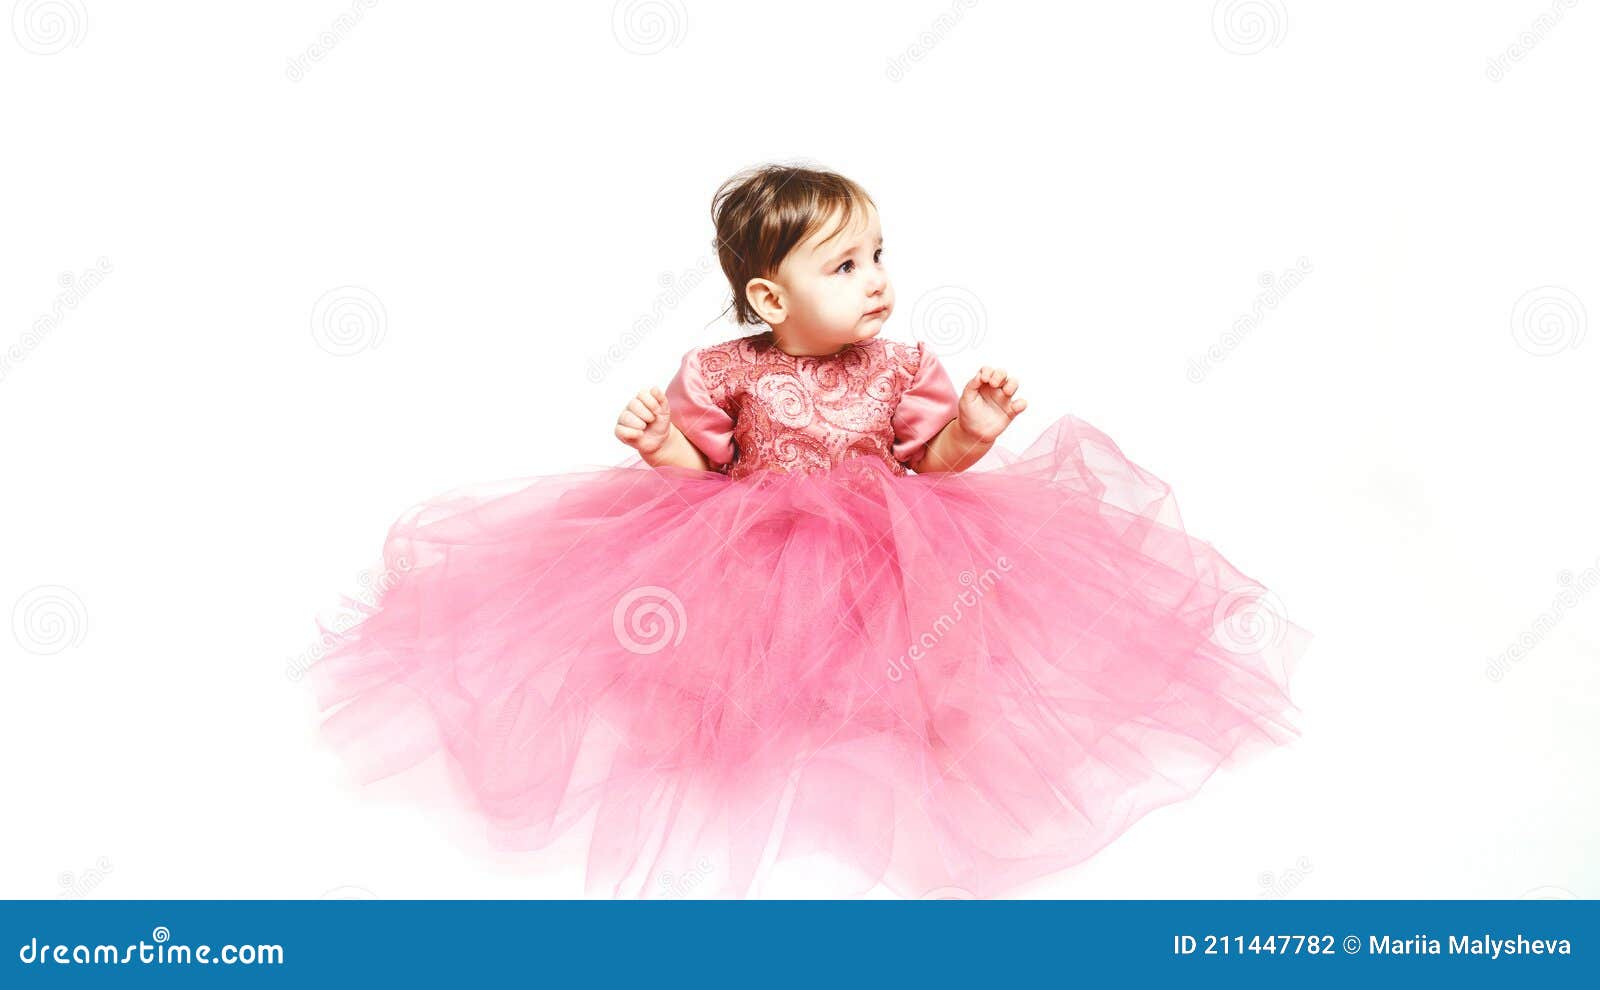 Little Princess. Portrait of a Cute Baby 9 Months Old in an ...